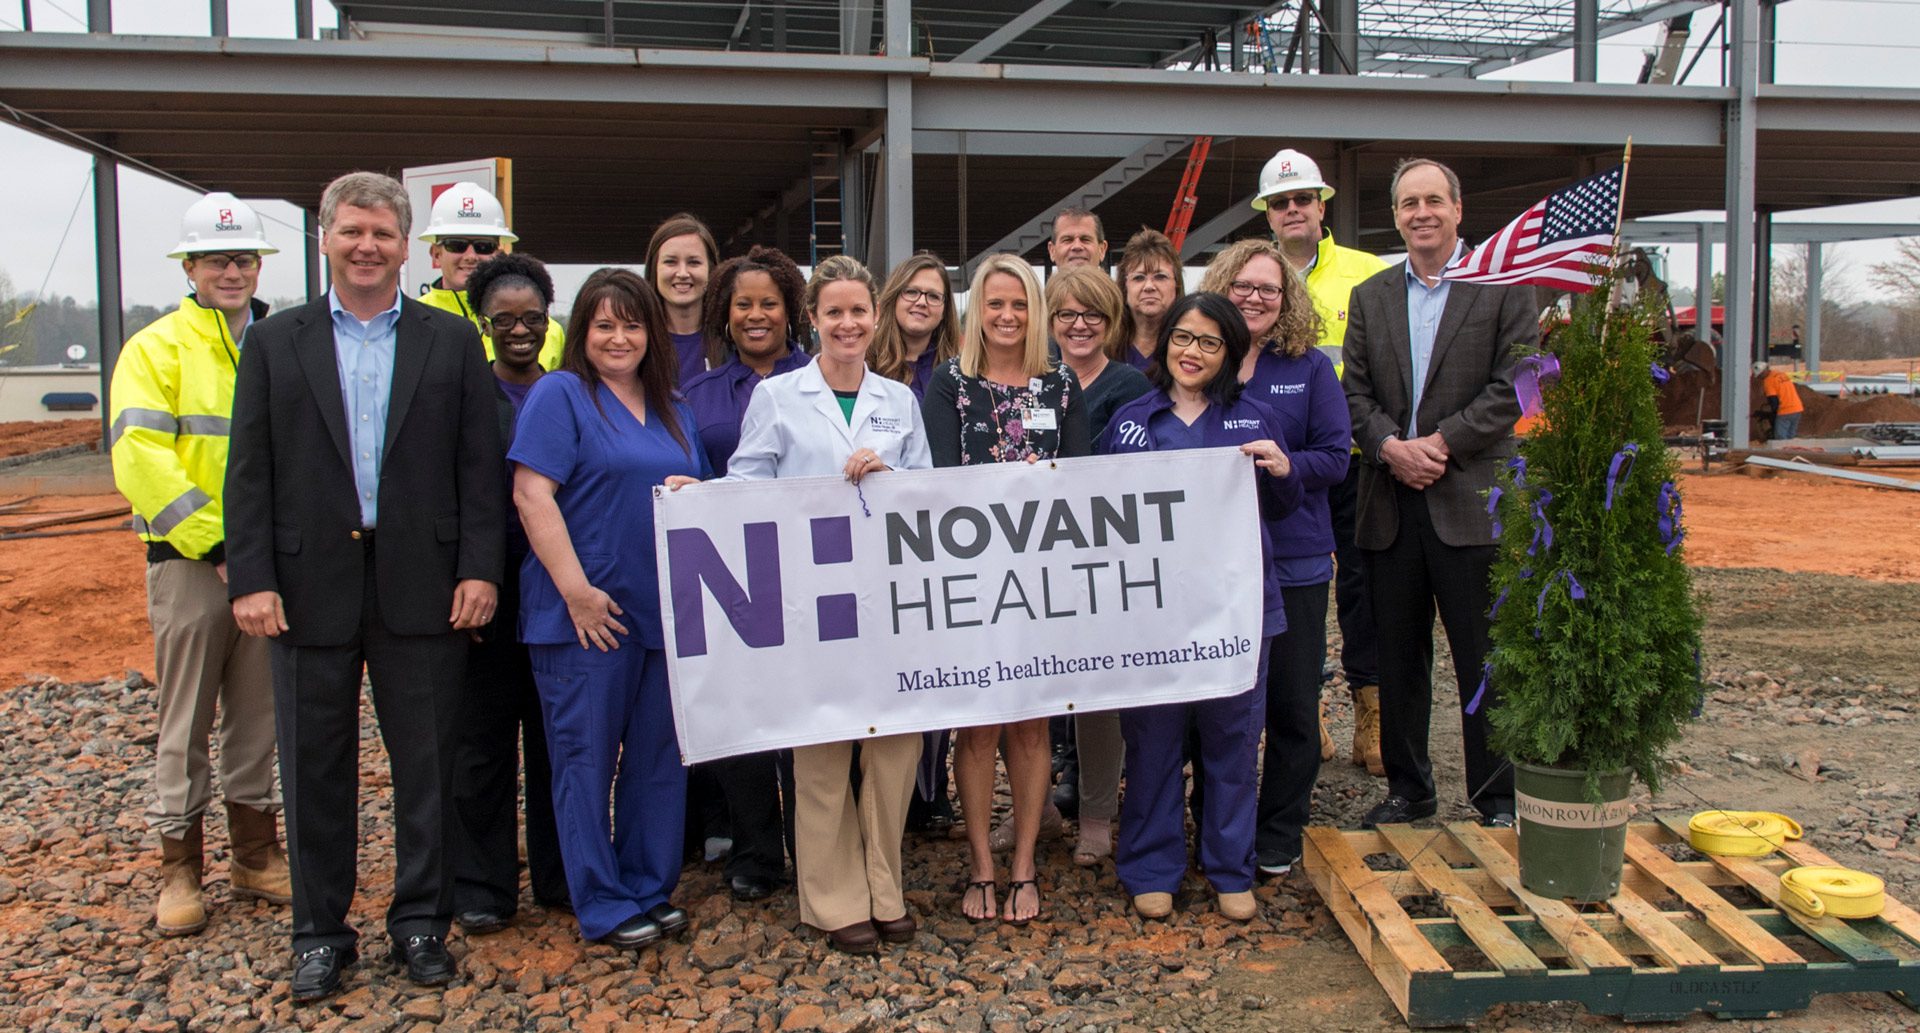 Denver-Medical-Novant-Topping-Out Shelco group outside physicians and developers smiling near steel frame